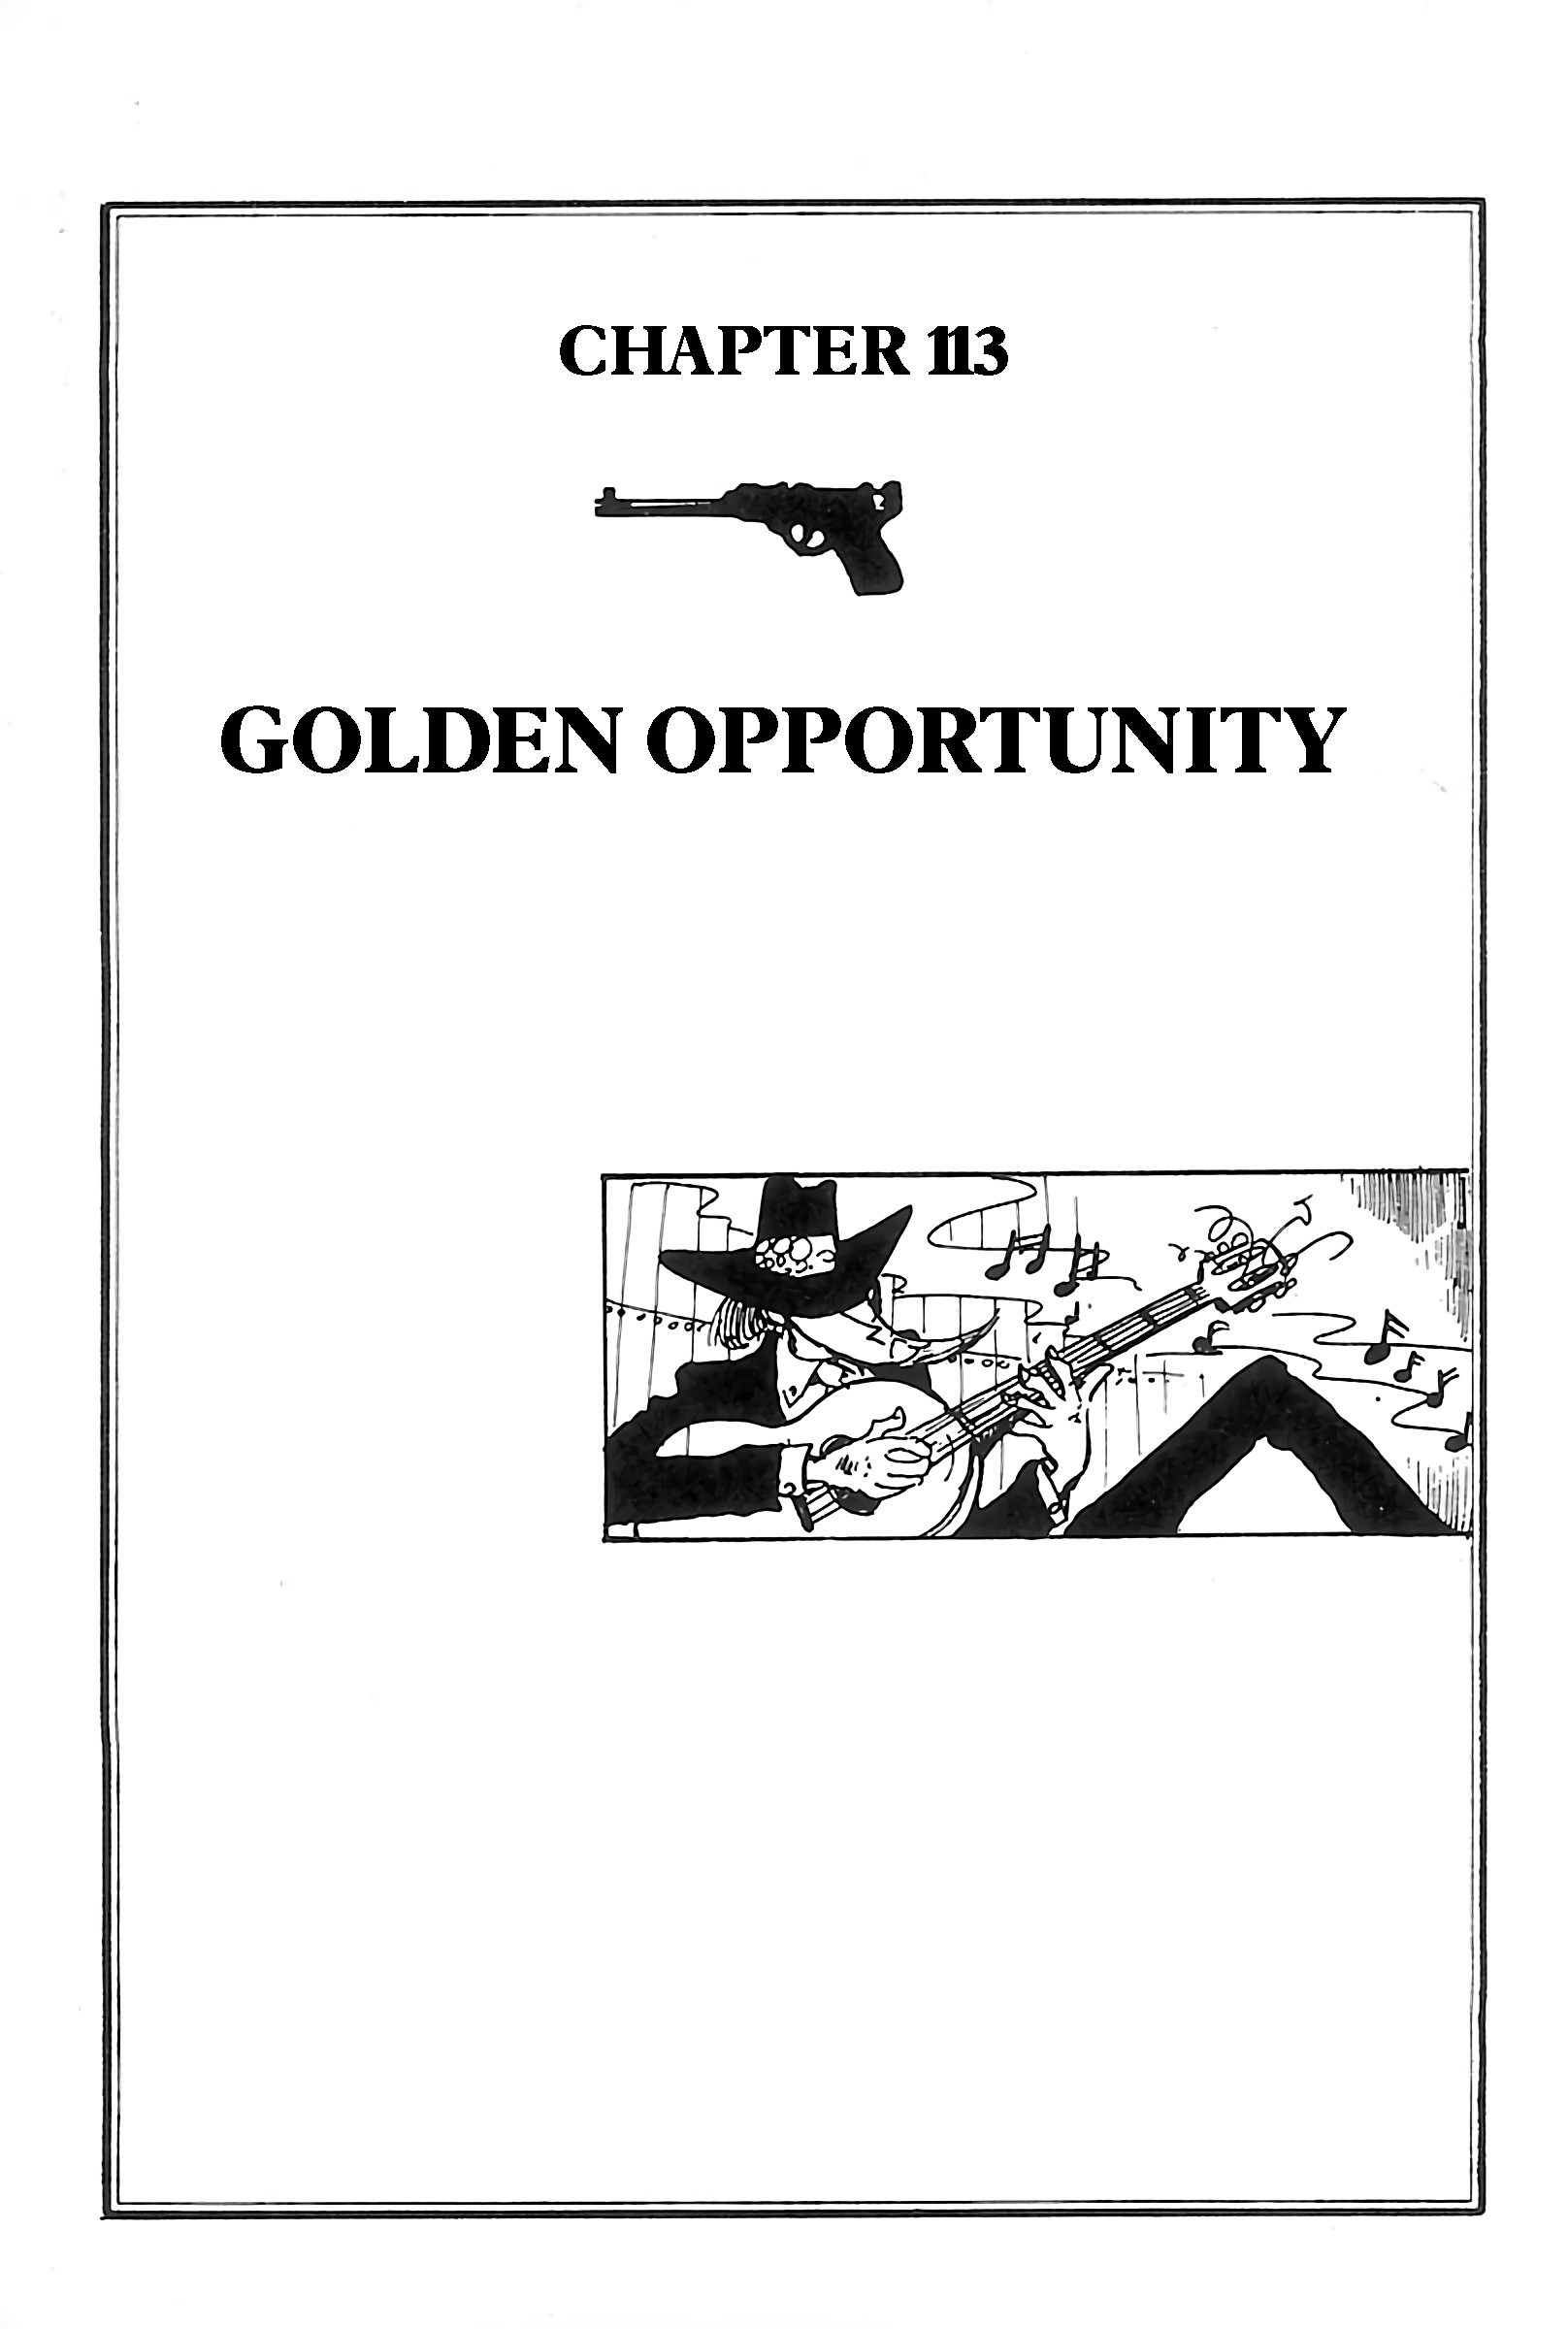 Lupin Iii: World’S Most Wanted Vol.10 Chapter 113: Golden Opportunity - Picture 1